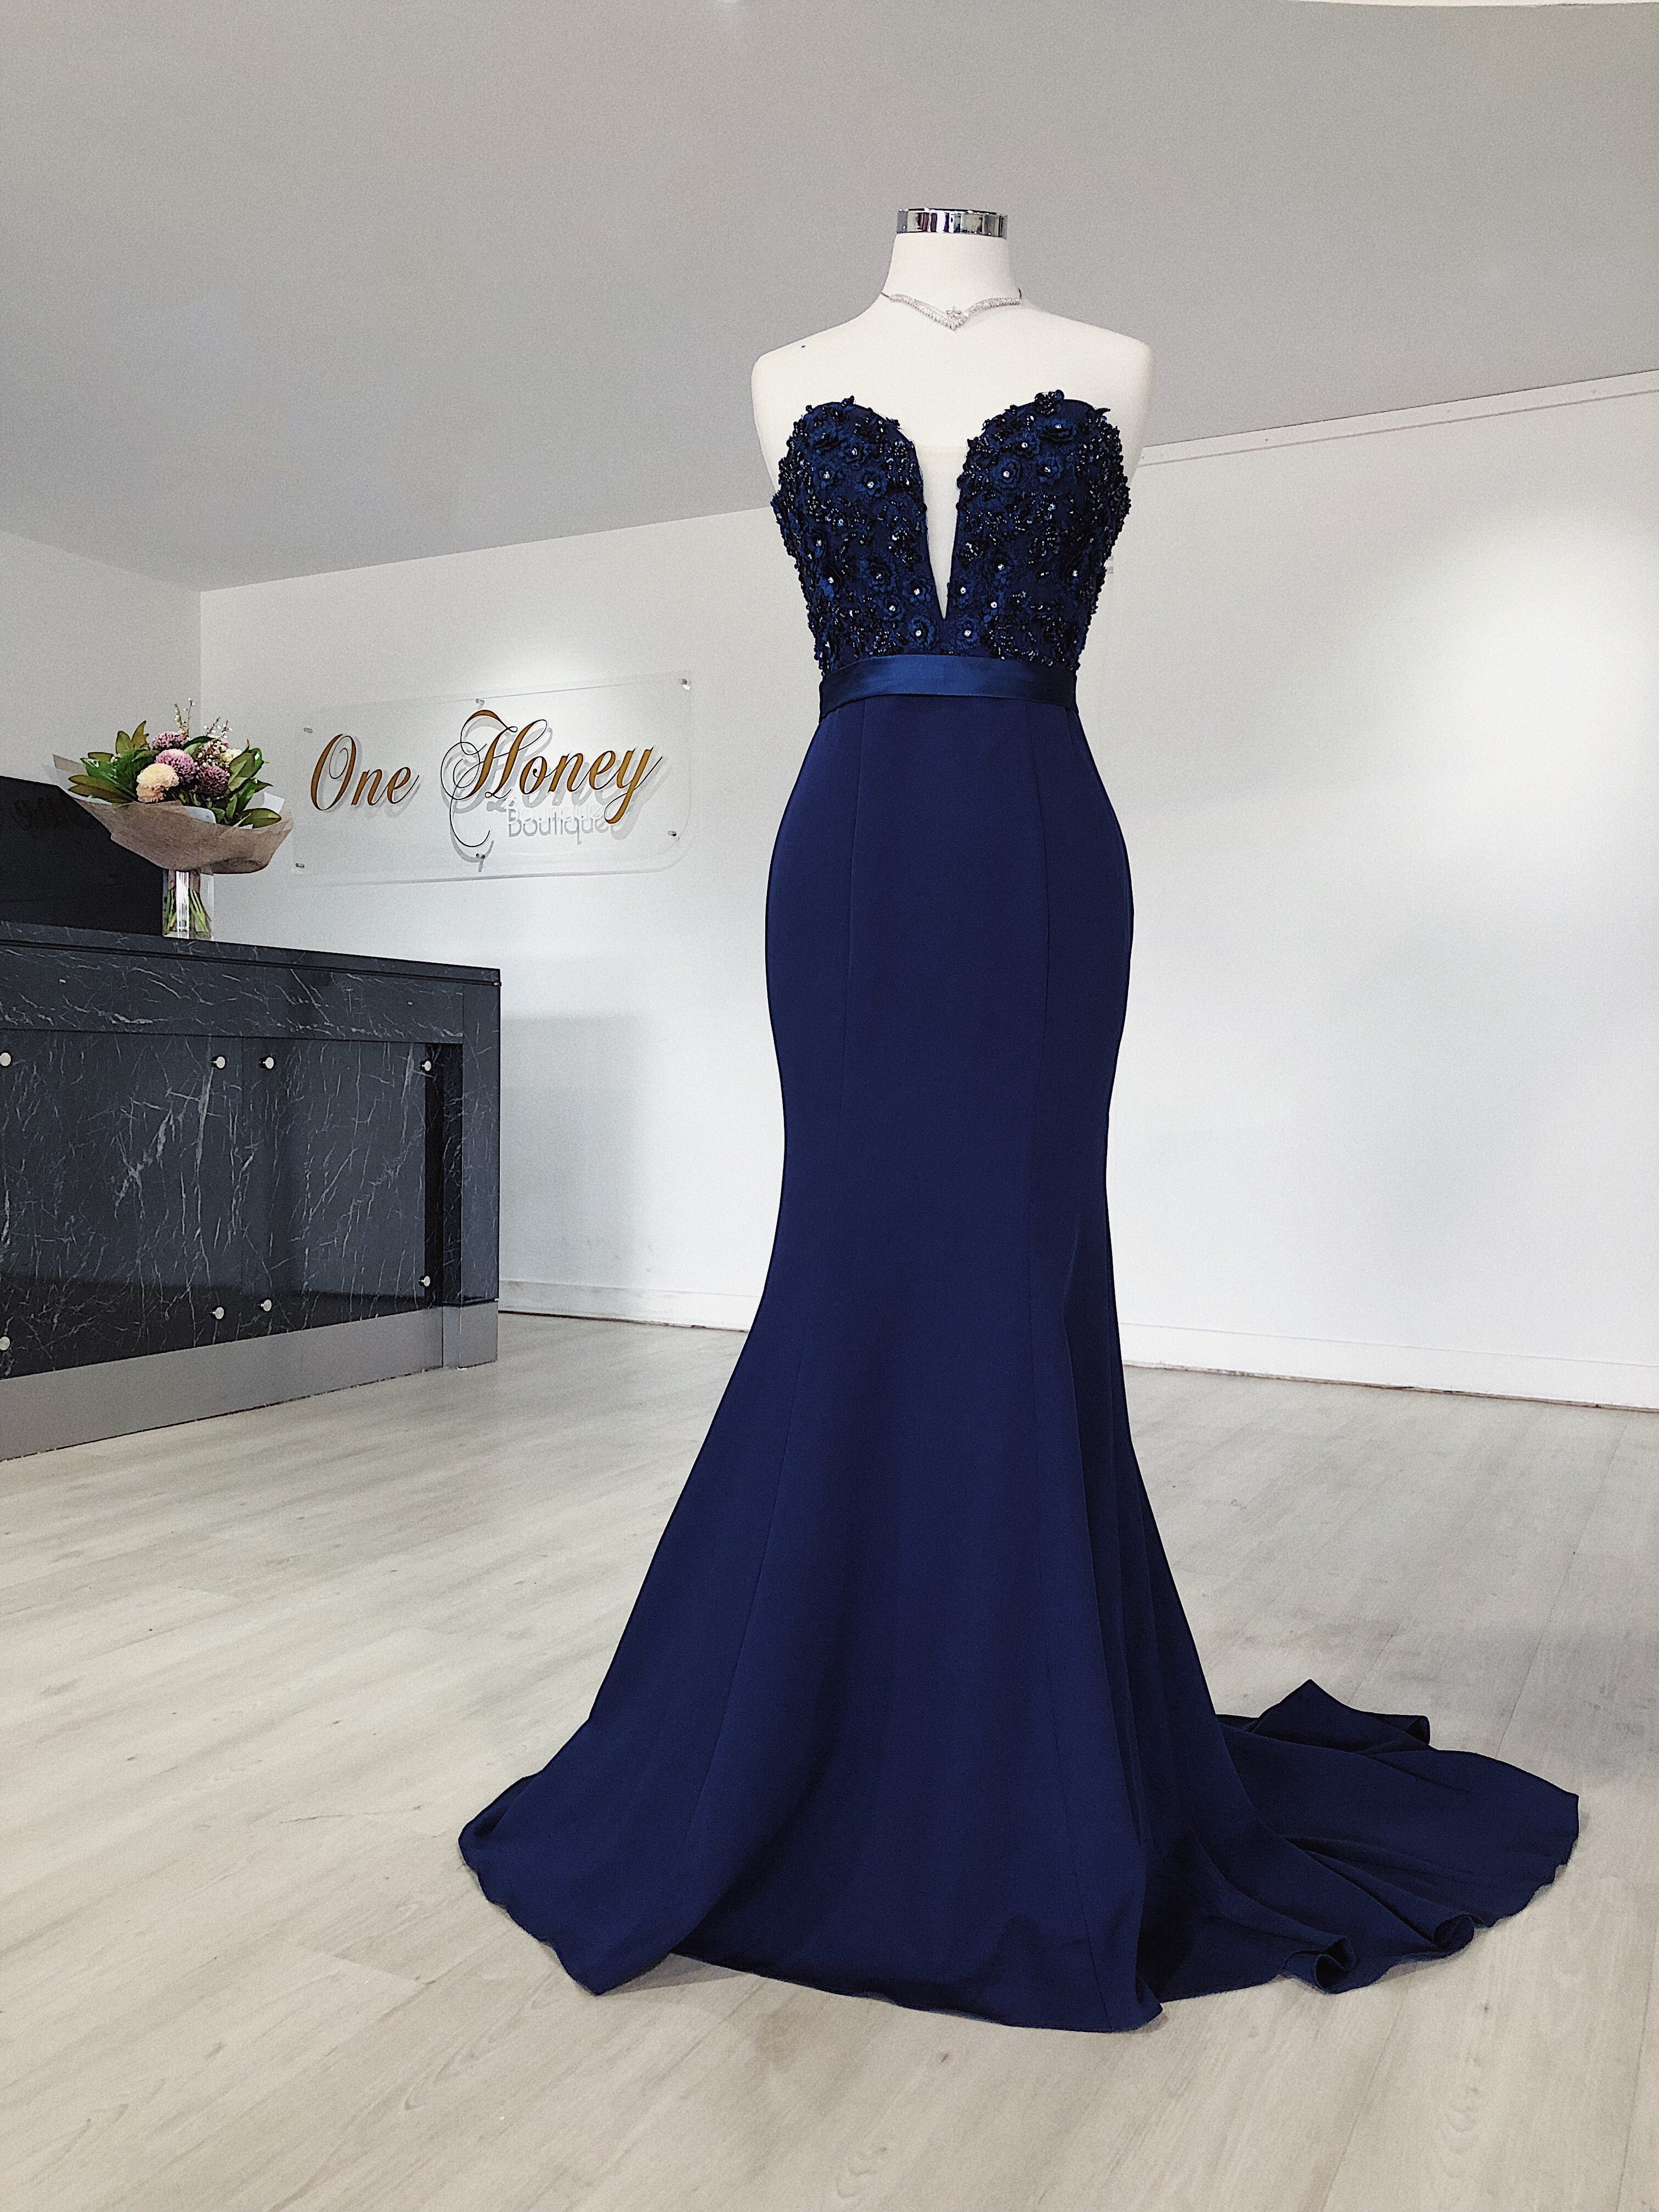 Honey Couture SERENA Blue Strapless Mermaid Formal Dress Honey Couture$ AfterPay Humm ZipPay LayBuy Sezzle